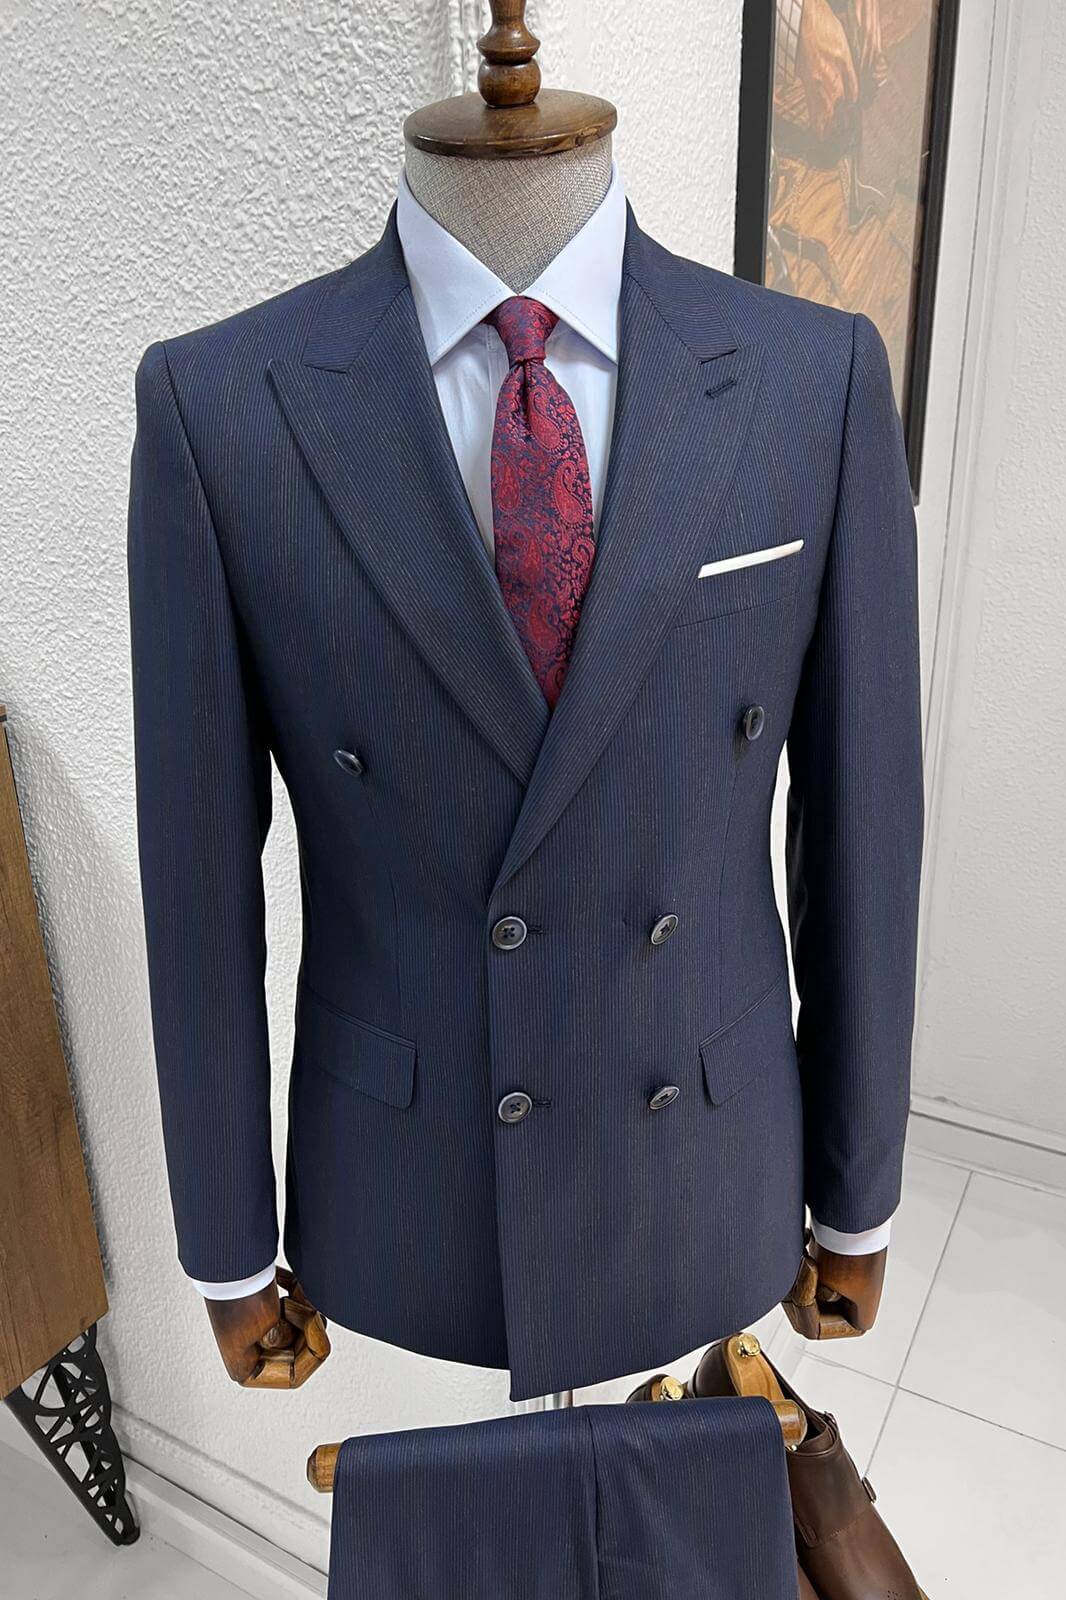 A Striped- Navy-blue- wool suit on display